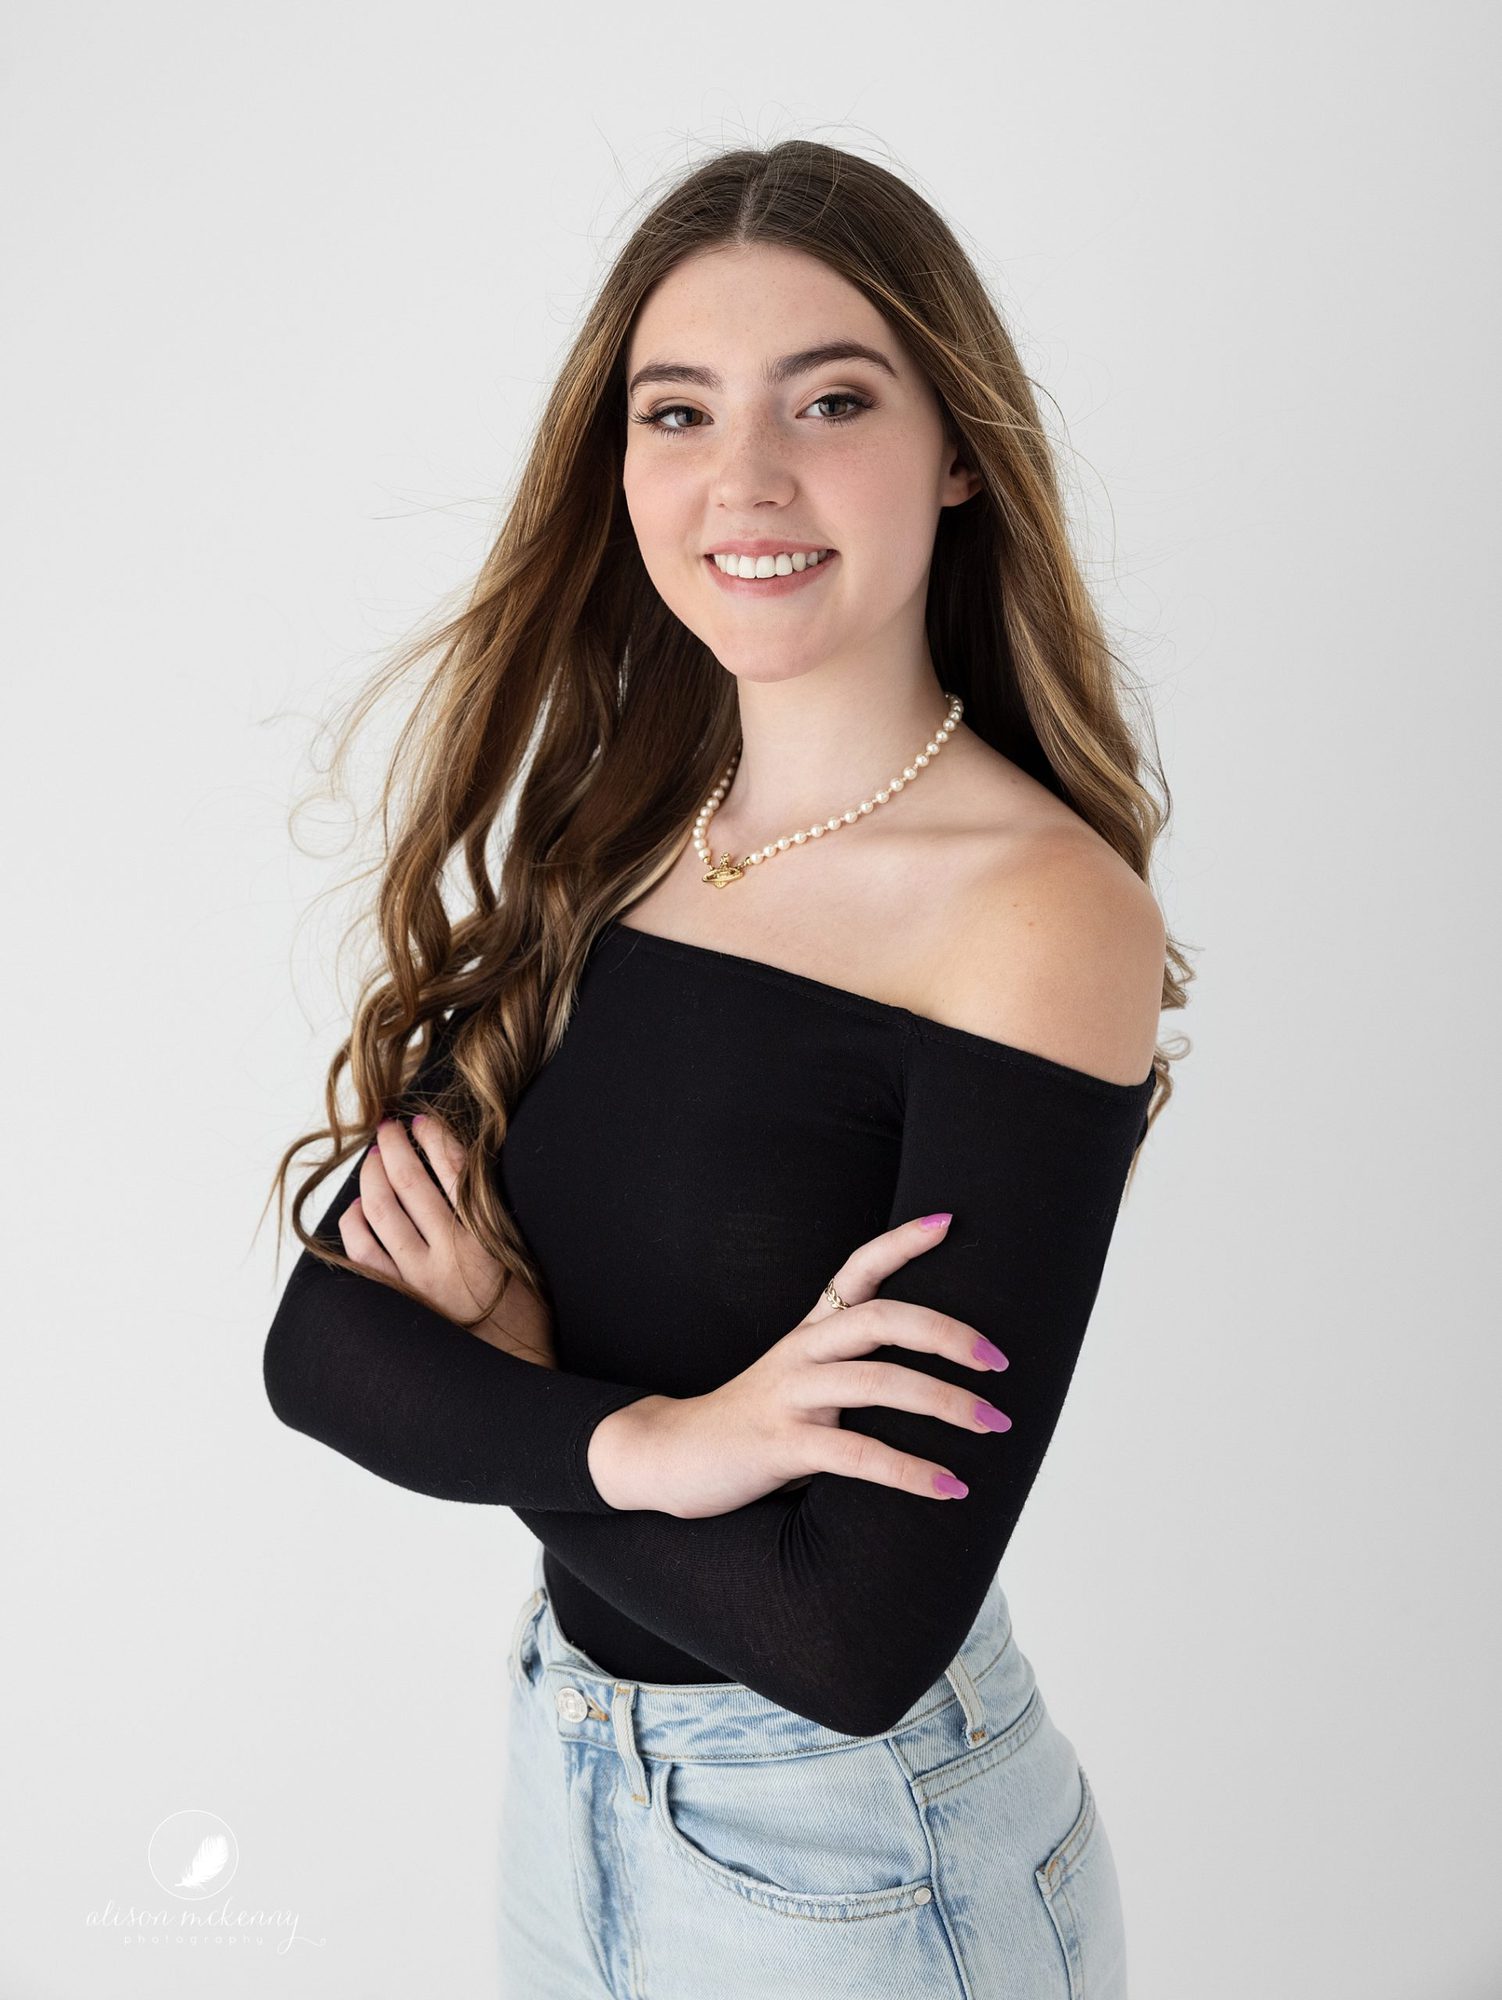 Long haired teen smiles with folded arms on white background